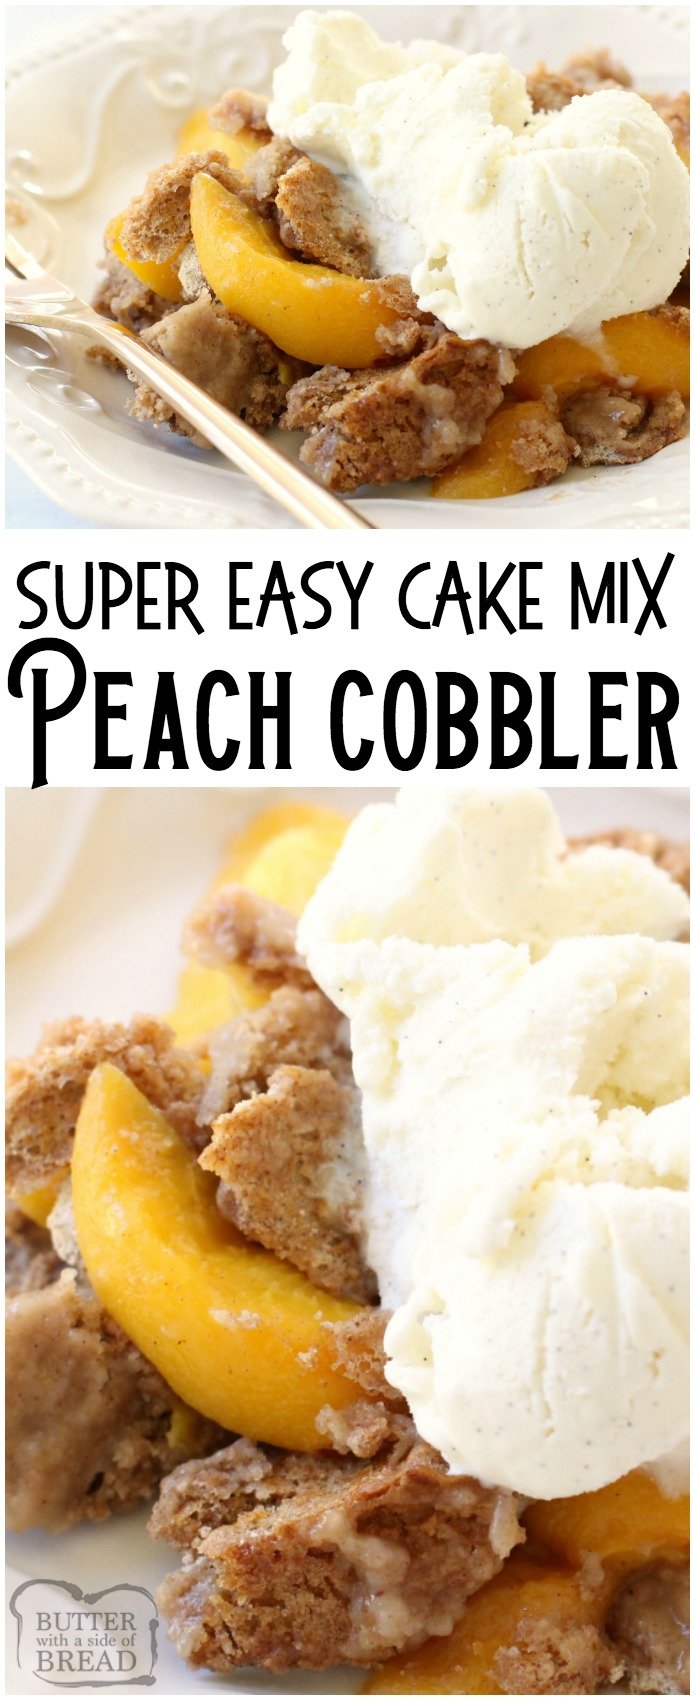 Peach Cobbler with Cake Mix could not be any simpler to make! All it takes is a cake mix + peaches + a can of soda. Delicious and easy peach cobbler recipe! #peach #cobbler #cakemix #dessert #baking #sweets #recipe from BUTTER WITH A SIDE OF BREAD